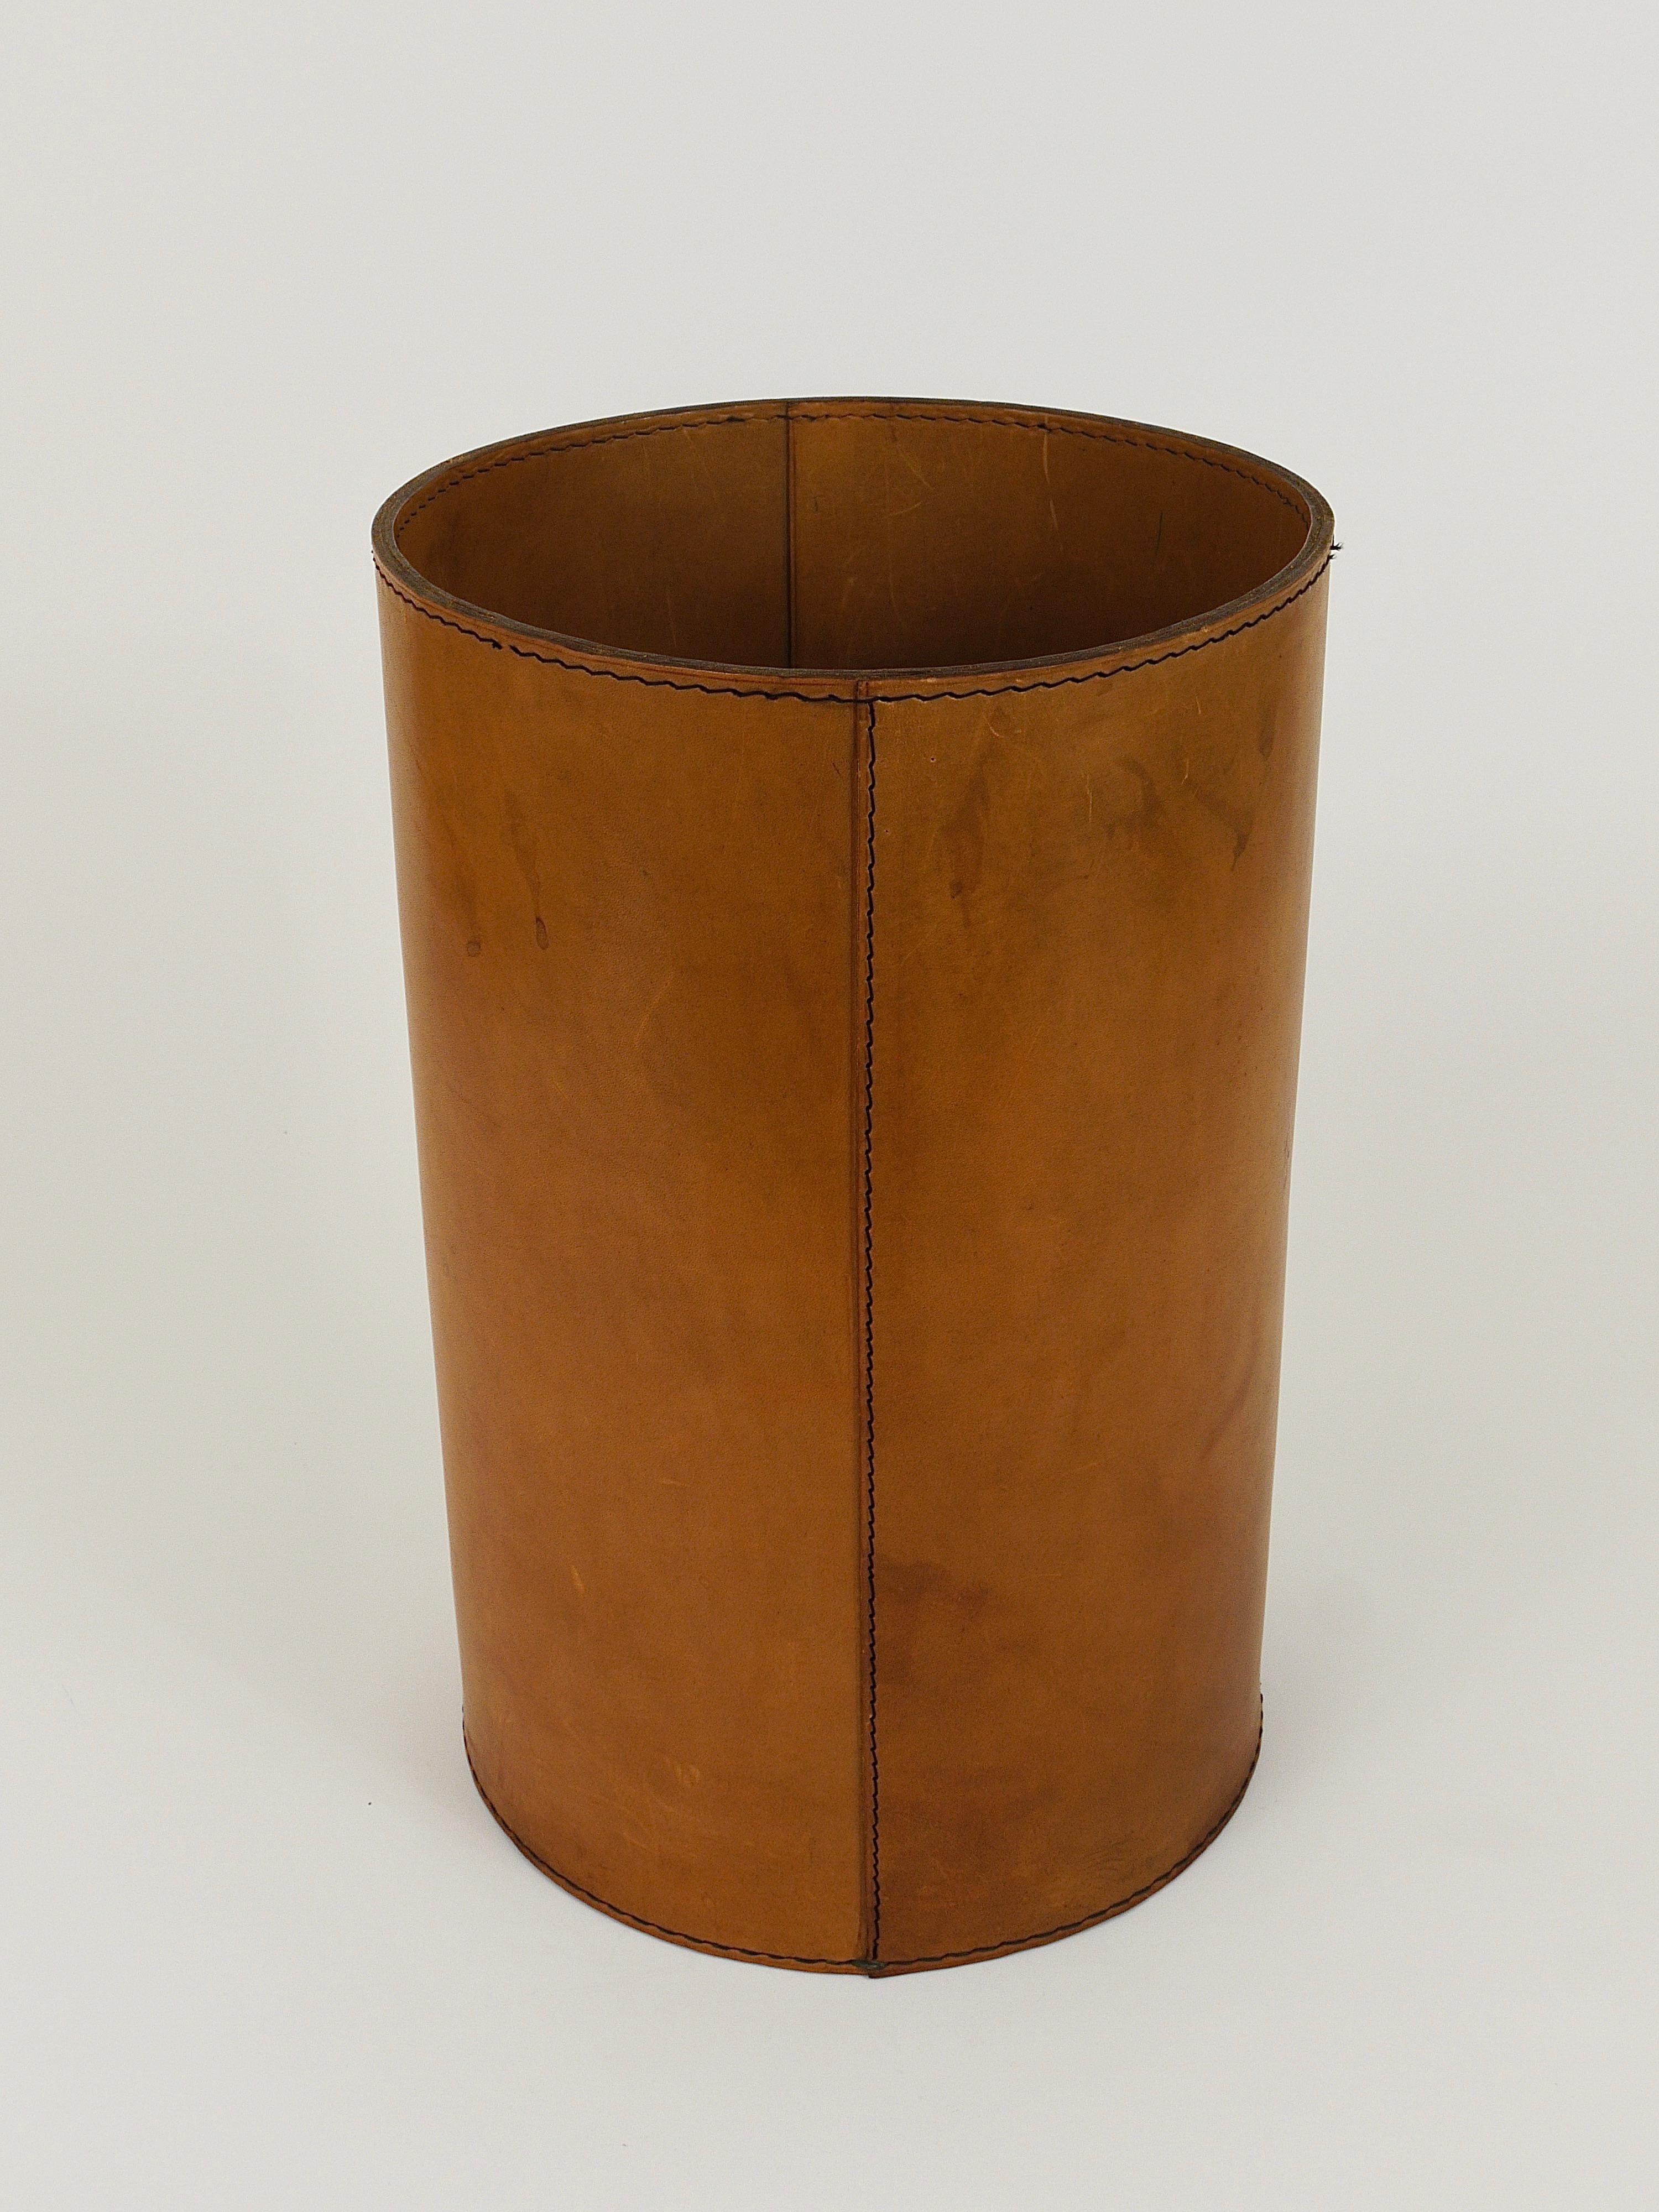 A beautiful and elegant, vintage Mid-Century Modern paper basket / paper bin from the 1950s. Designed an executed by by Werkstätte Carl Aubock, Vienna / Austria. Handmade and hand-sewn from thick honey / cognac brown leather. In very good condition